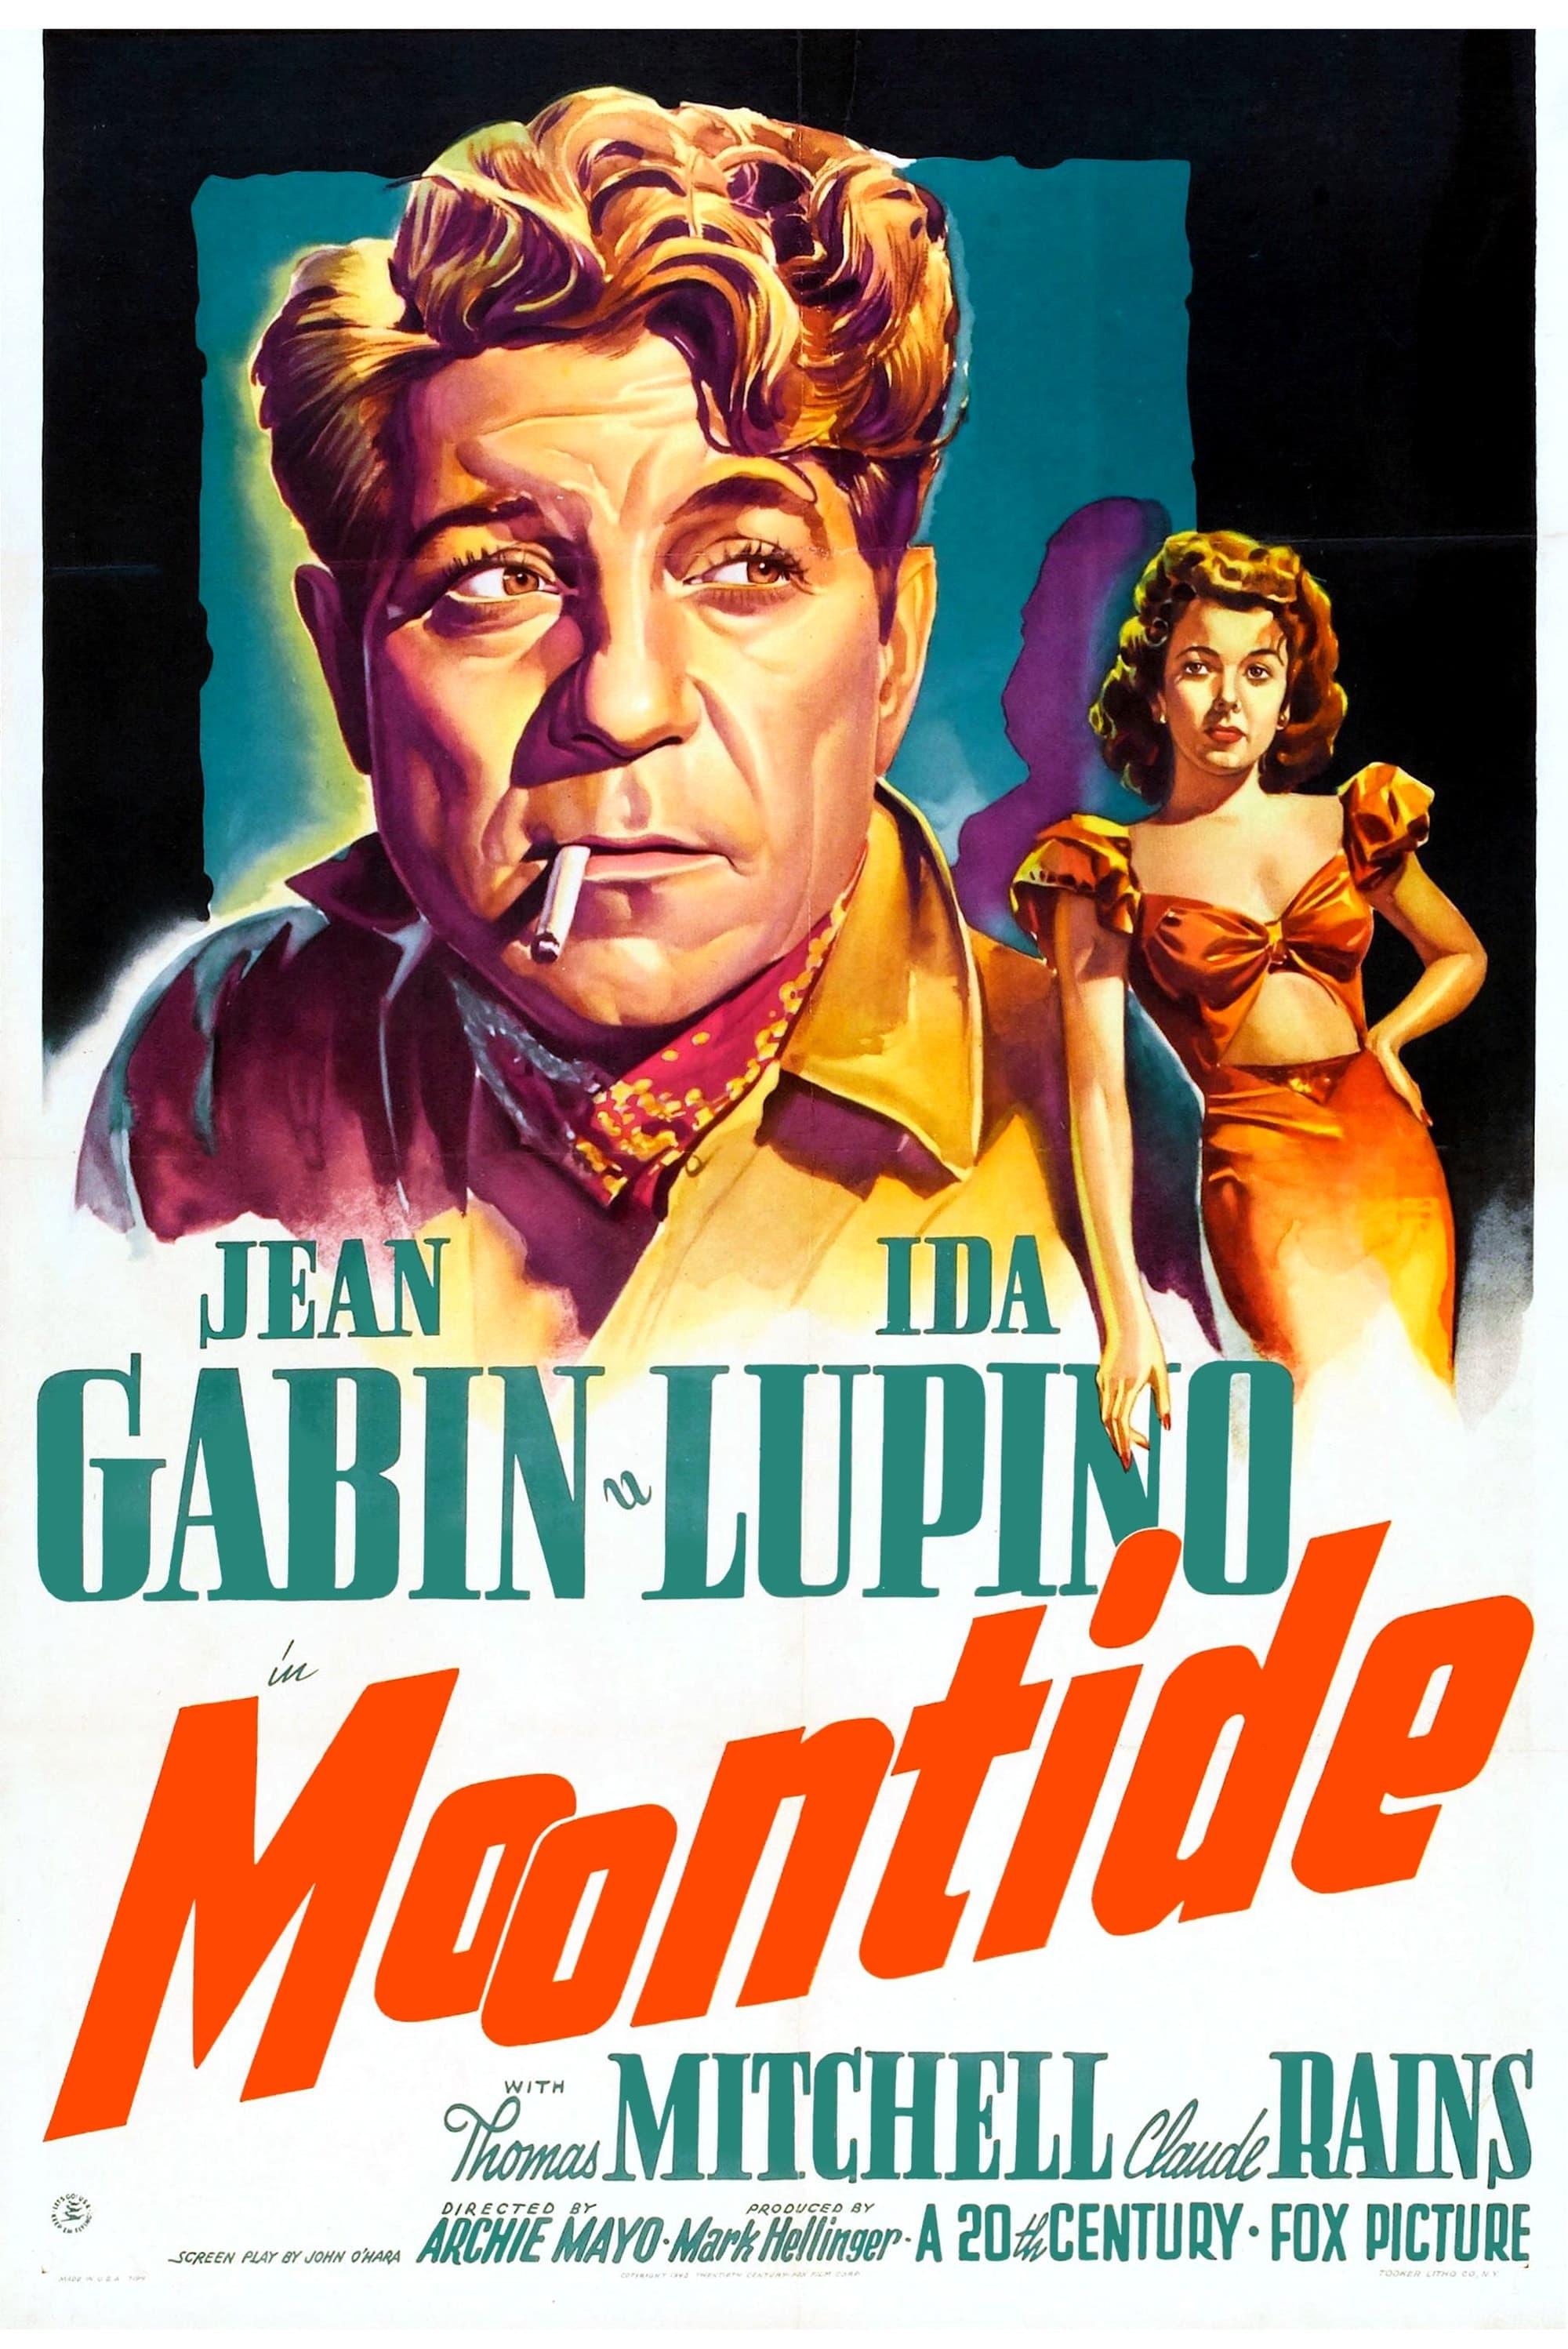 Moontide poster